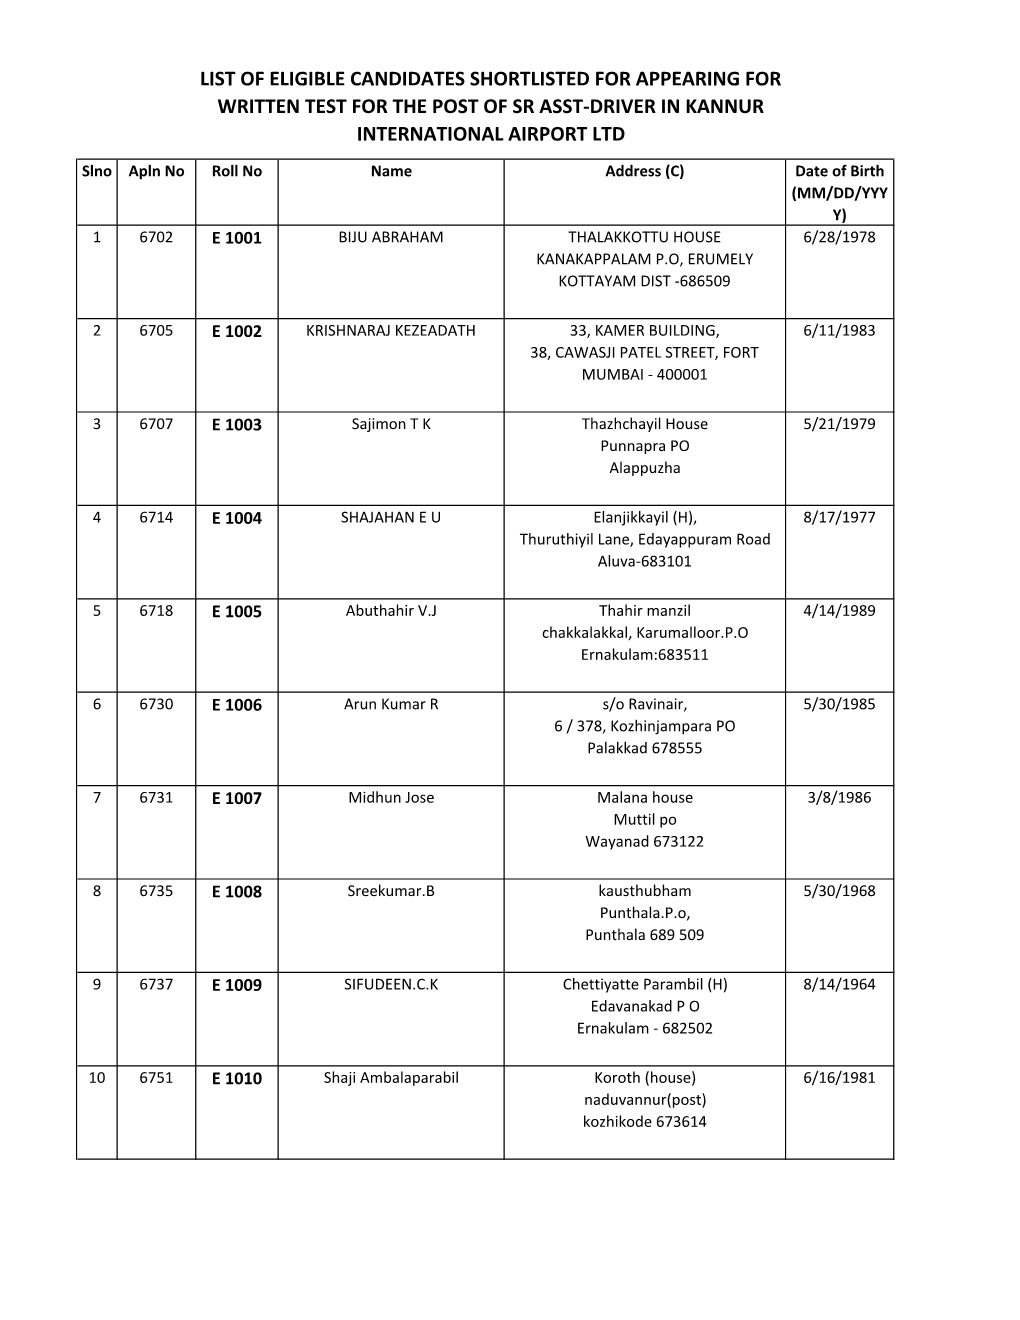 List of Eligible Candidates Shortlisted for Appearing for Written Test for the Post of Sr Asst-Driver in Kannur International Airport Ltd